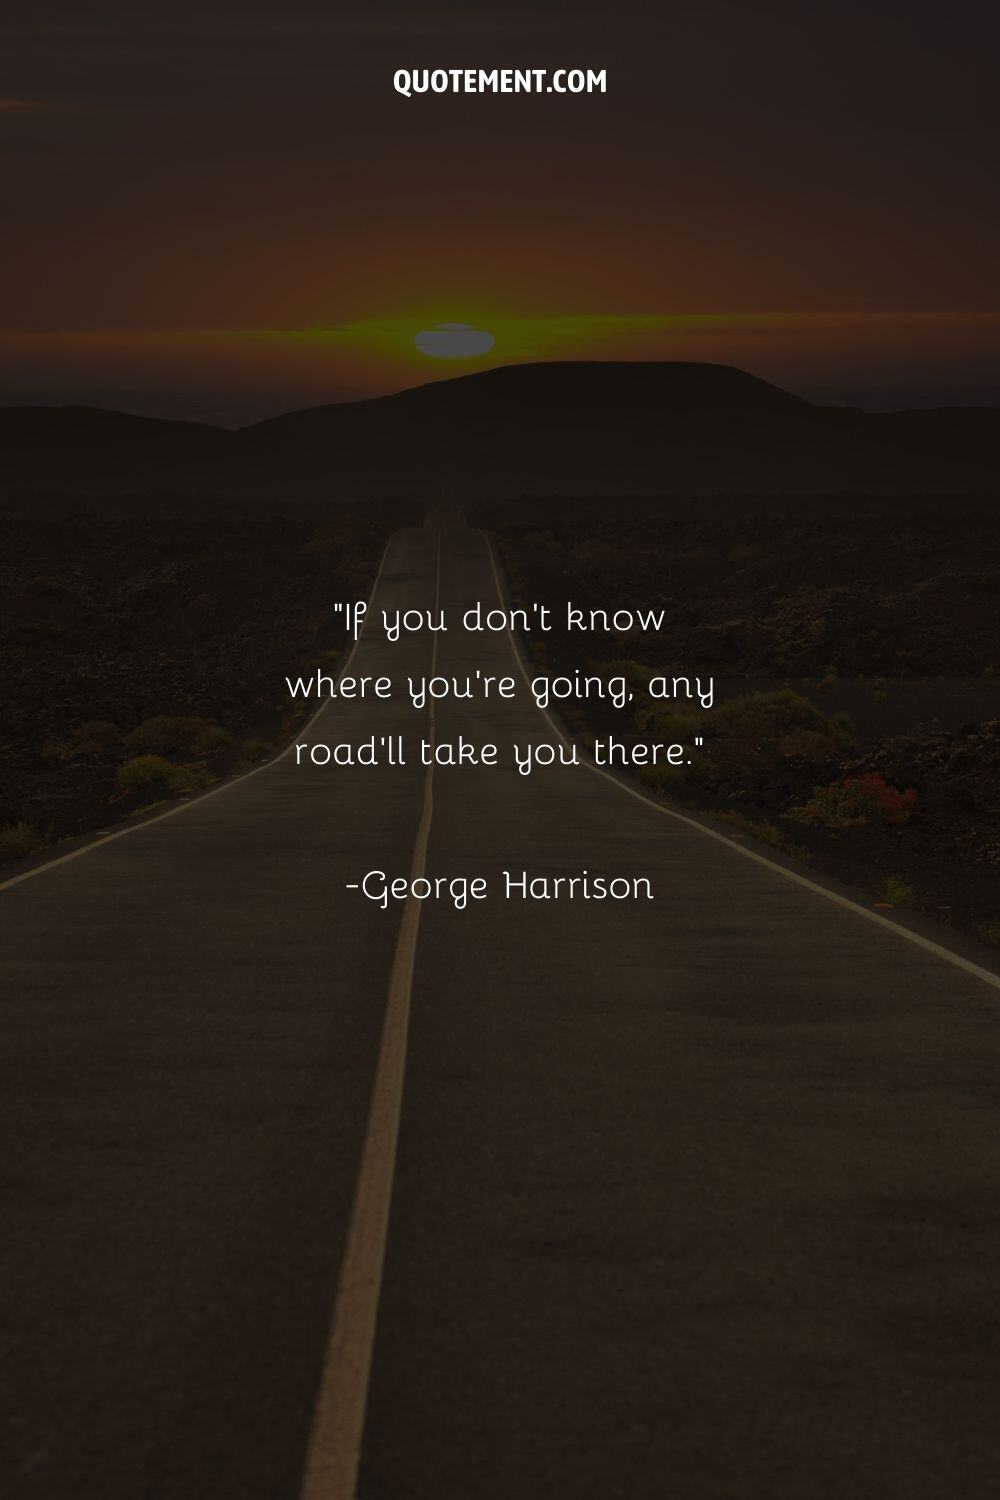 image of a road under the sunset representing a quote by George Harrison
